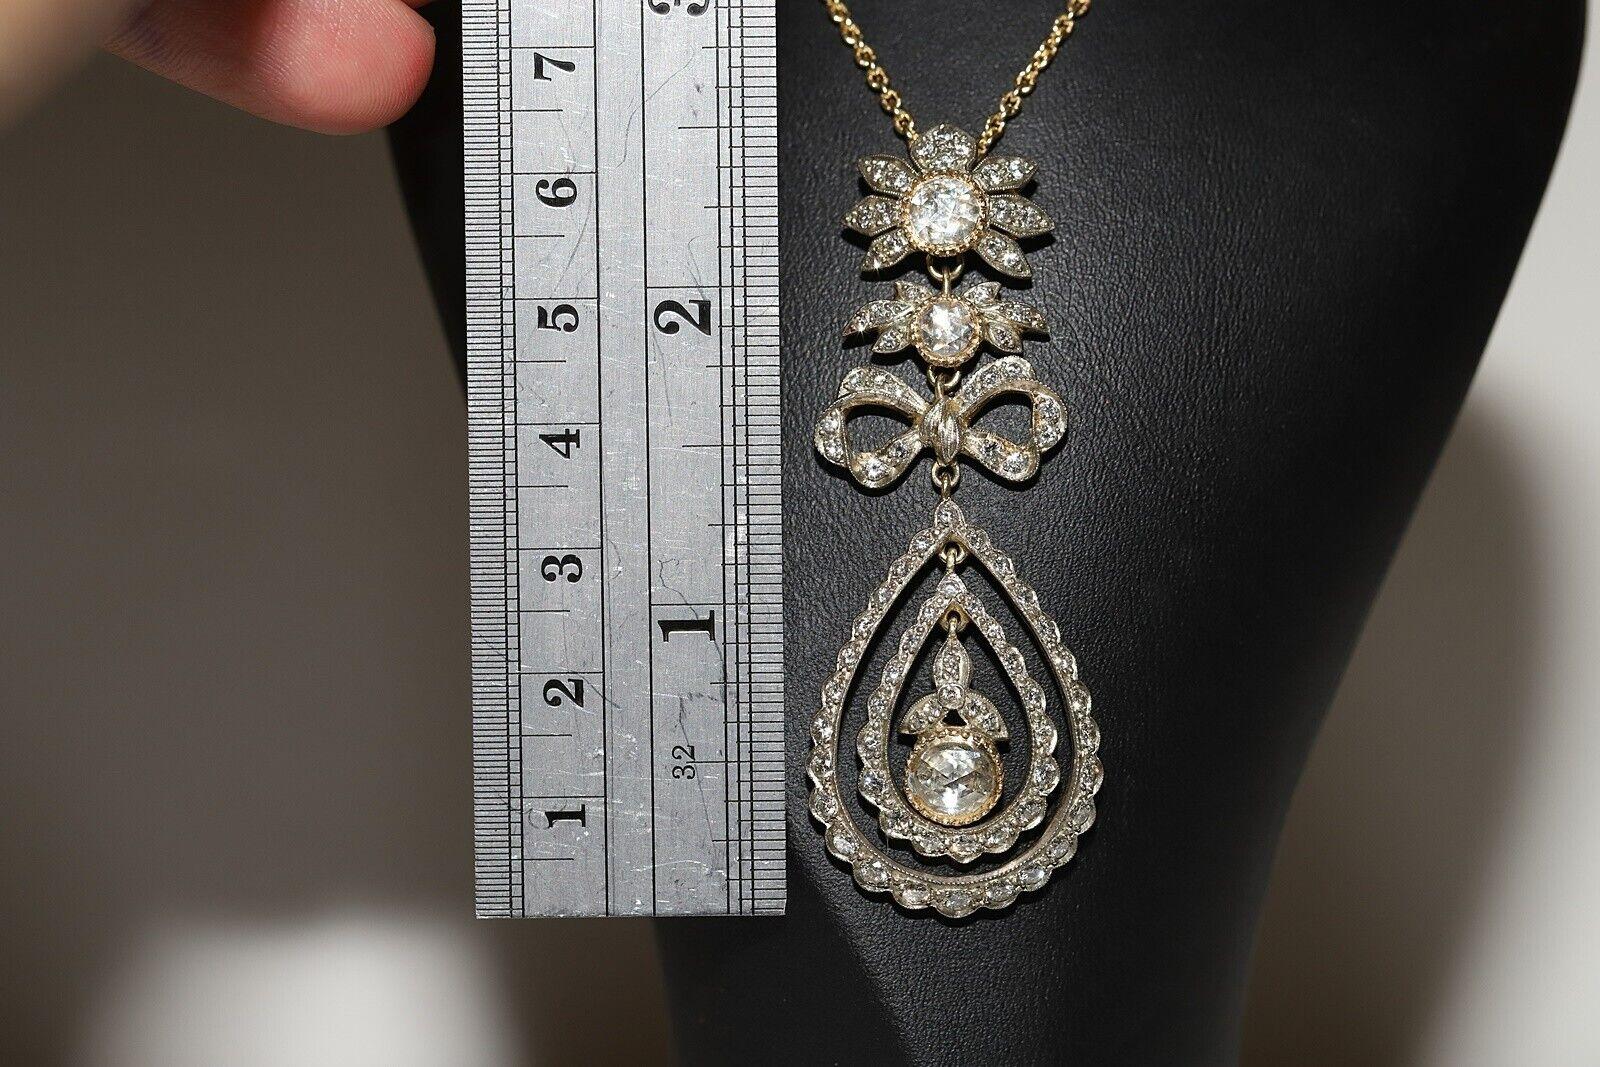 In very good condition.
Total weight is 18.5 grams.
Totally is brilliant cut diamond 1 carat.
Totally is rose cut diamond totally 1.30 carat.
The diamond is has G-H color and vs-s1-s2 clarity.
Total chain lenght is 45 cm.
Please contact for any